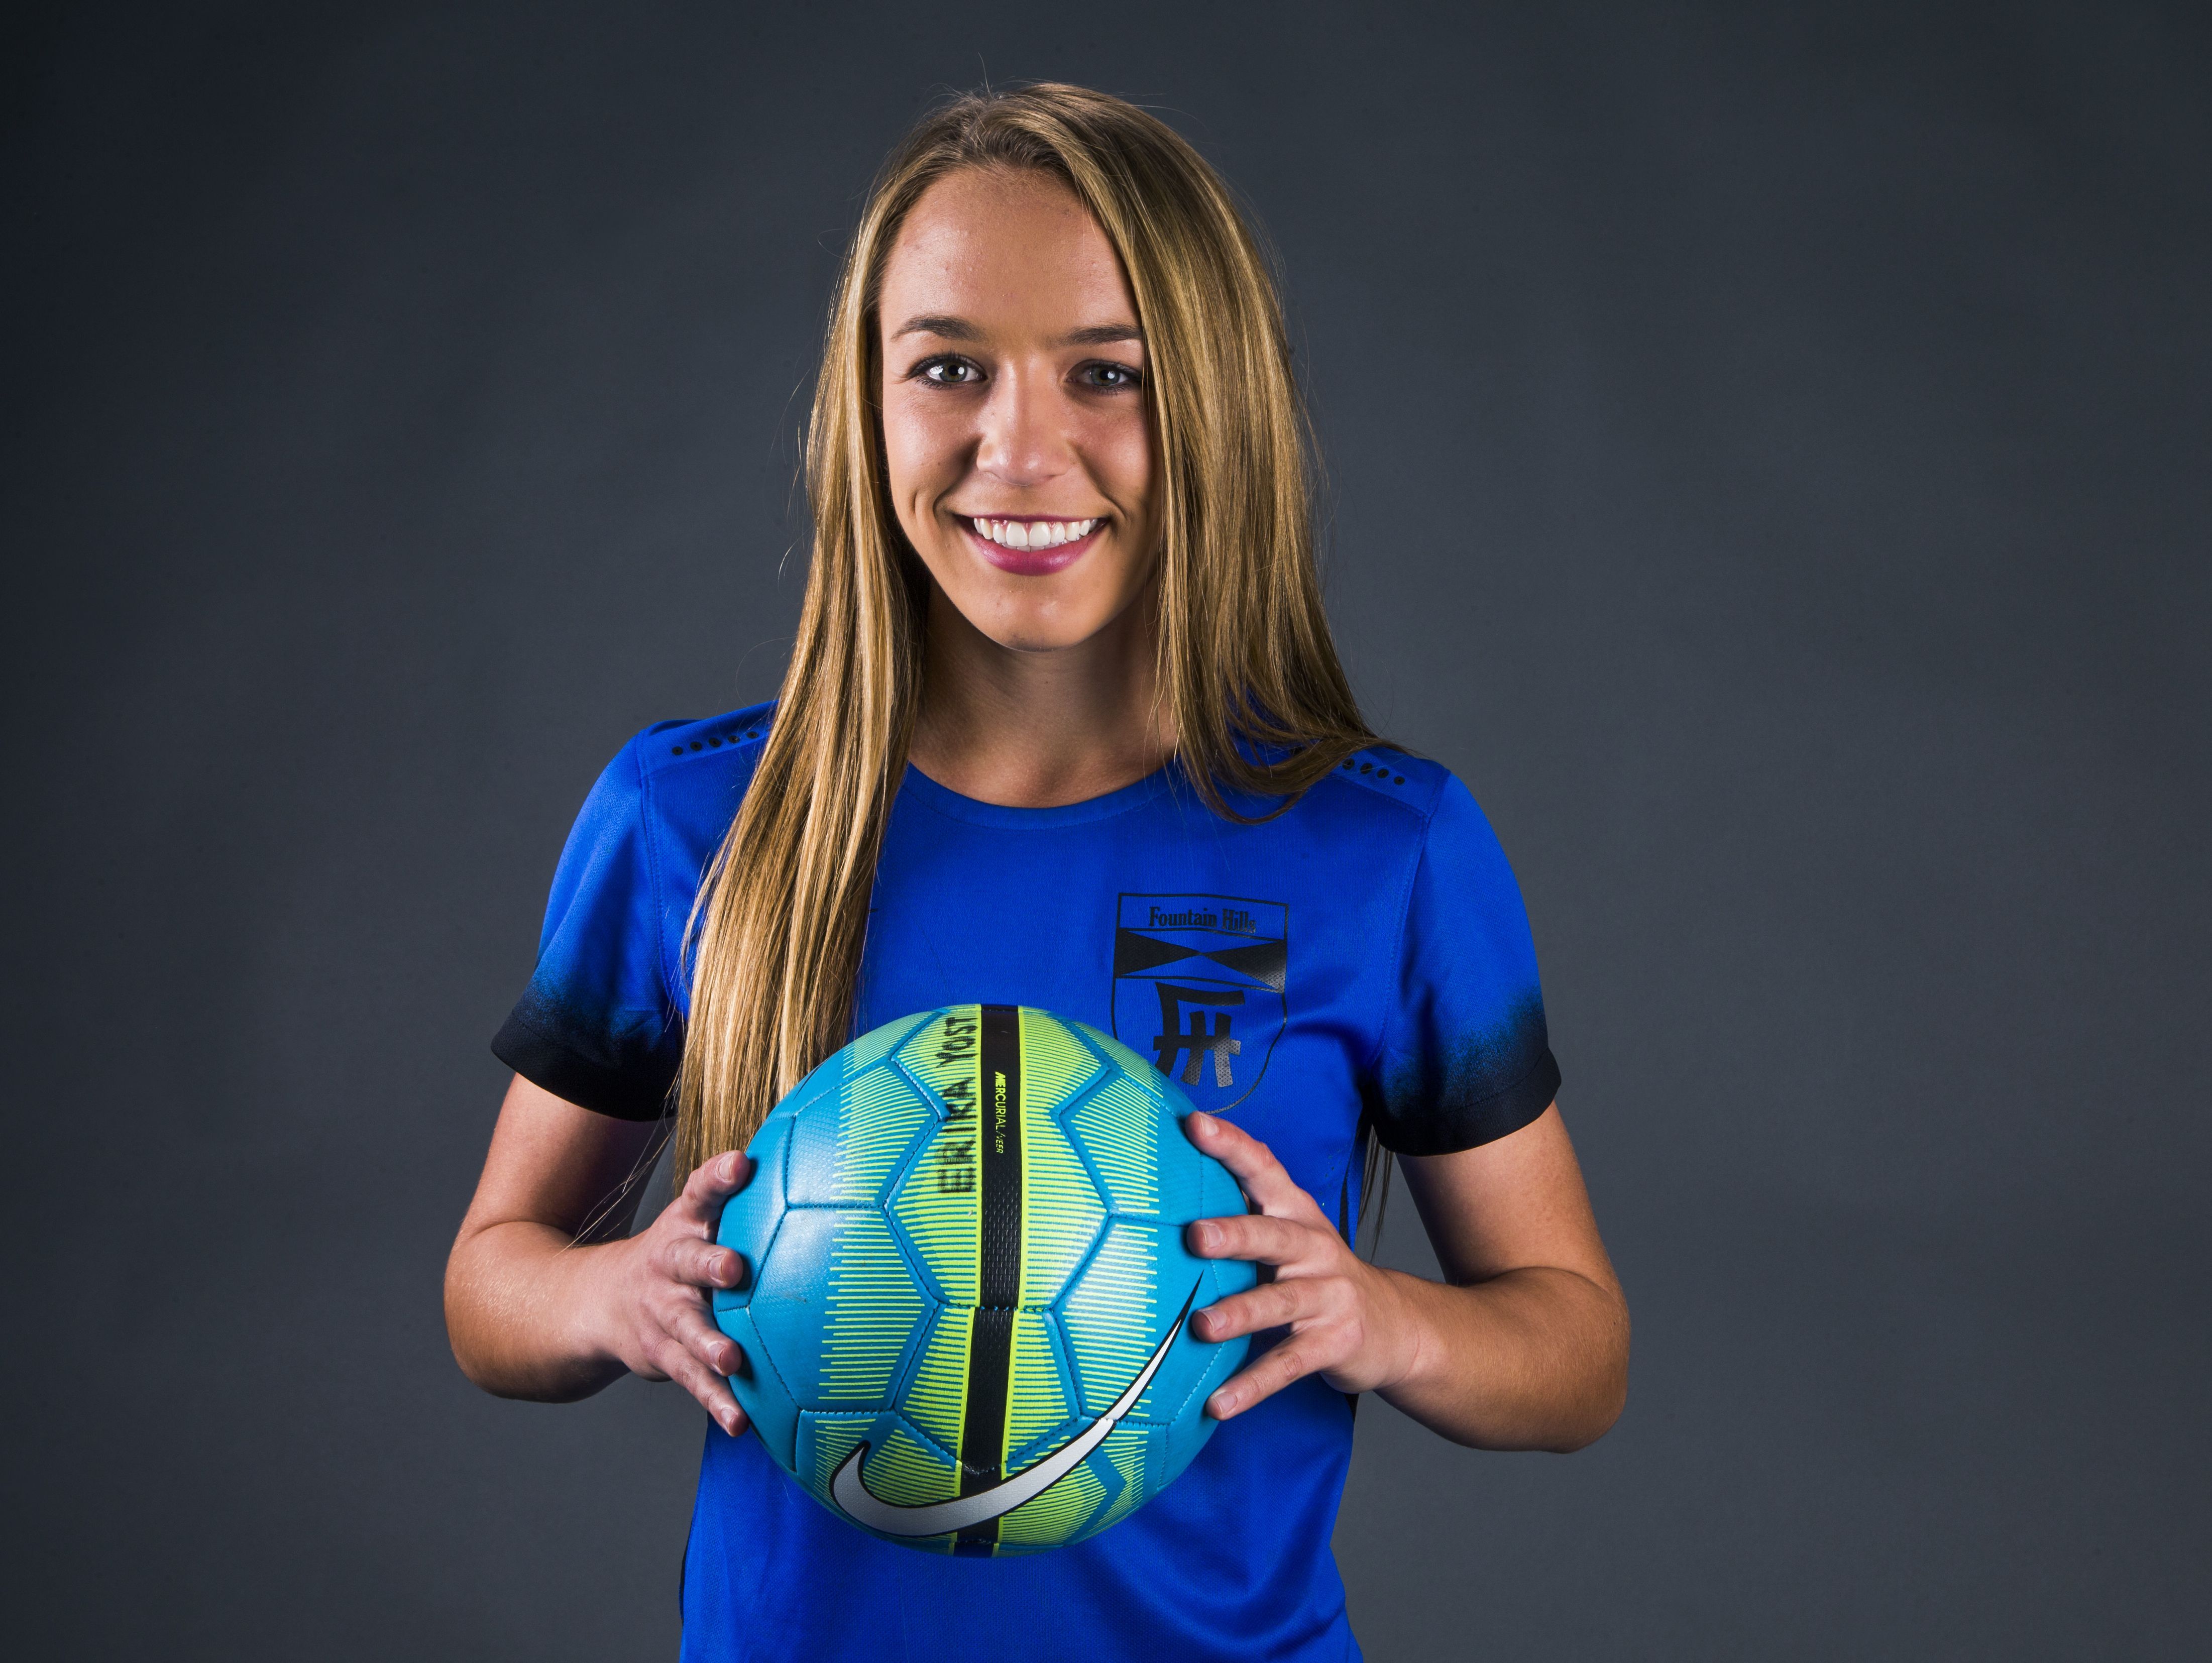 Fountain Hills senior forward Erika Yost is a finalist for the azcentral.com Sports Awards Small Schools Girls Soccer Athlete of the Year award.